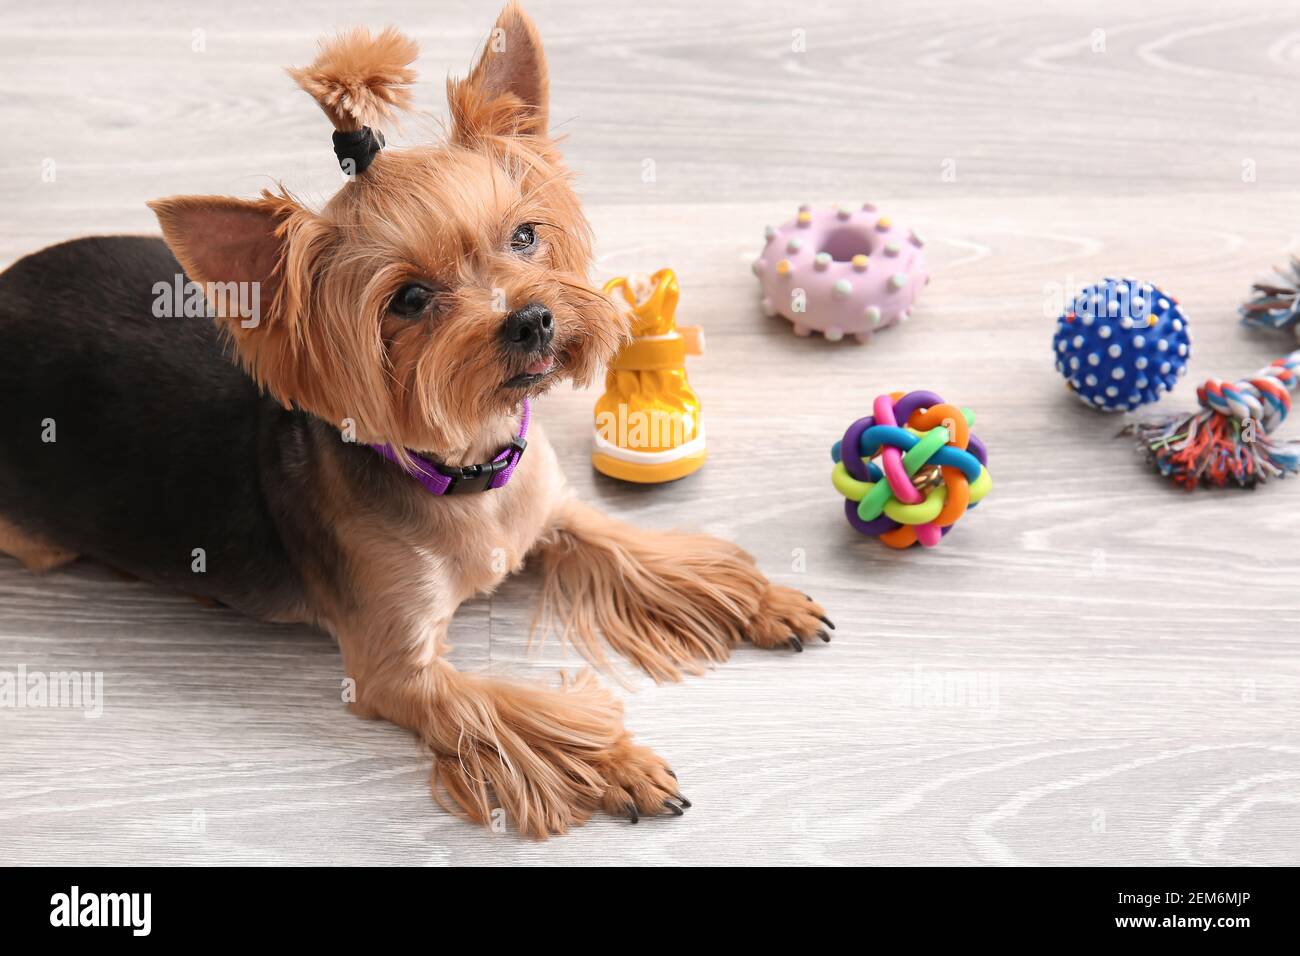 Cute funny dog and pet care accessories at home Stock Photo - Alamy